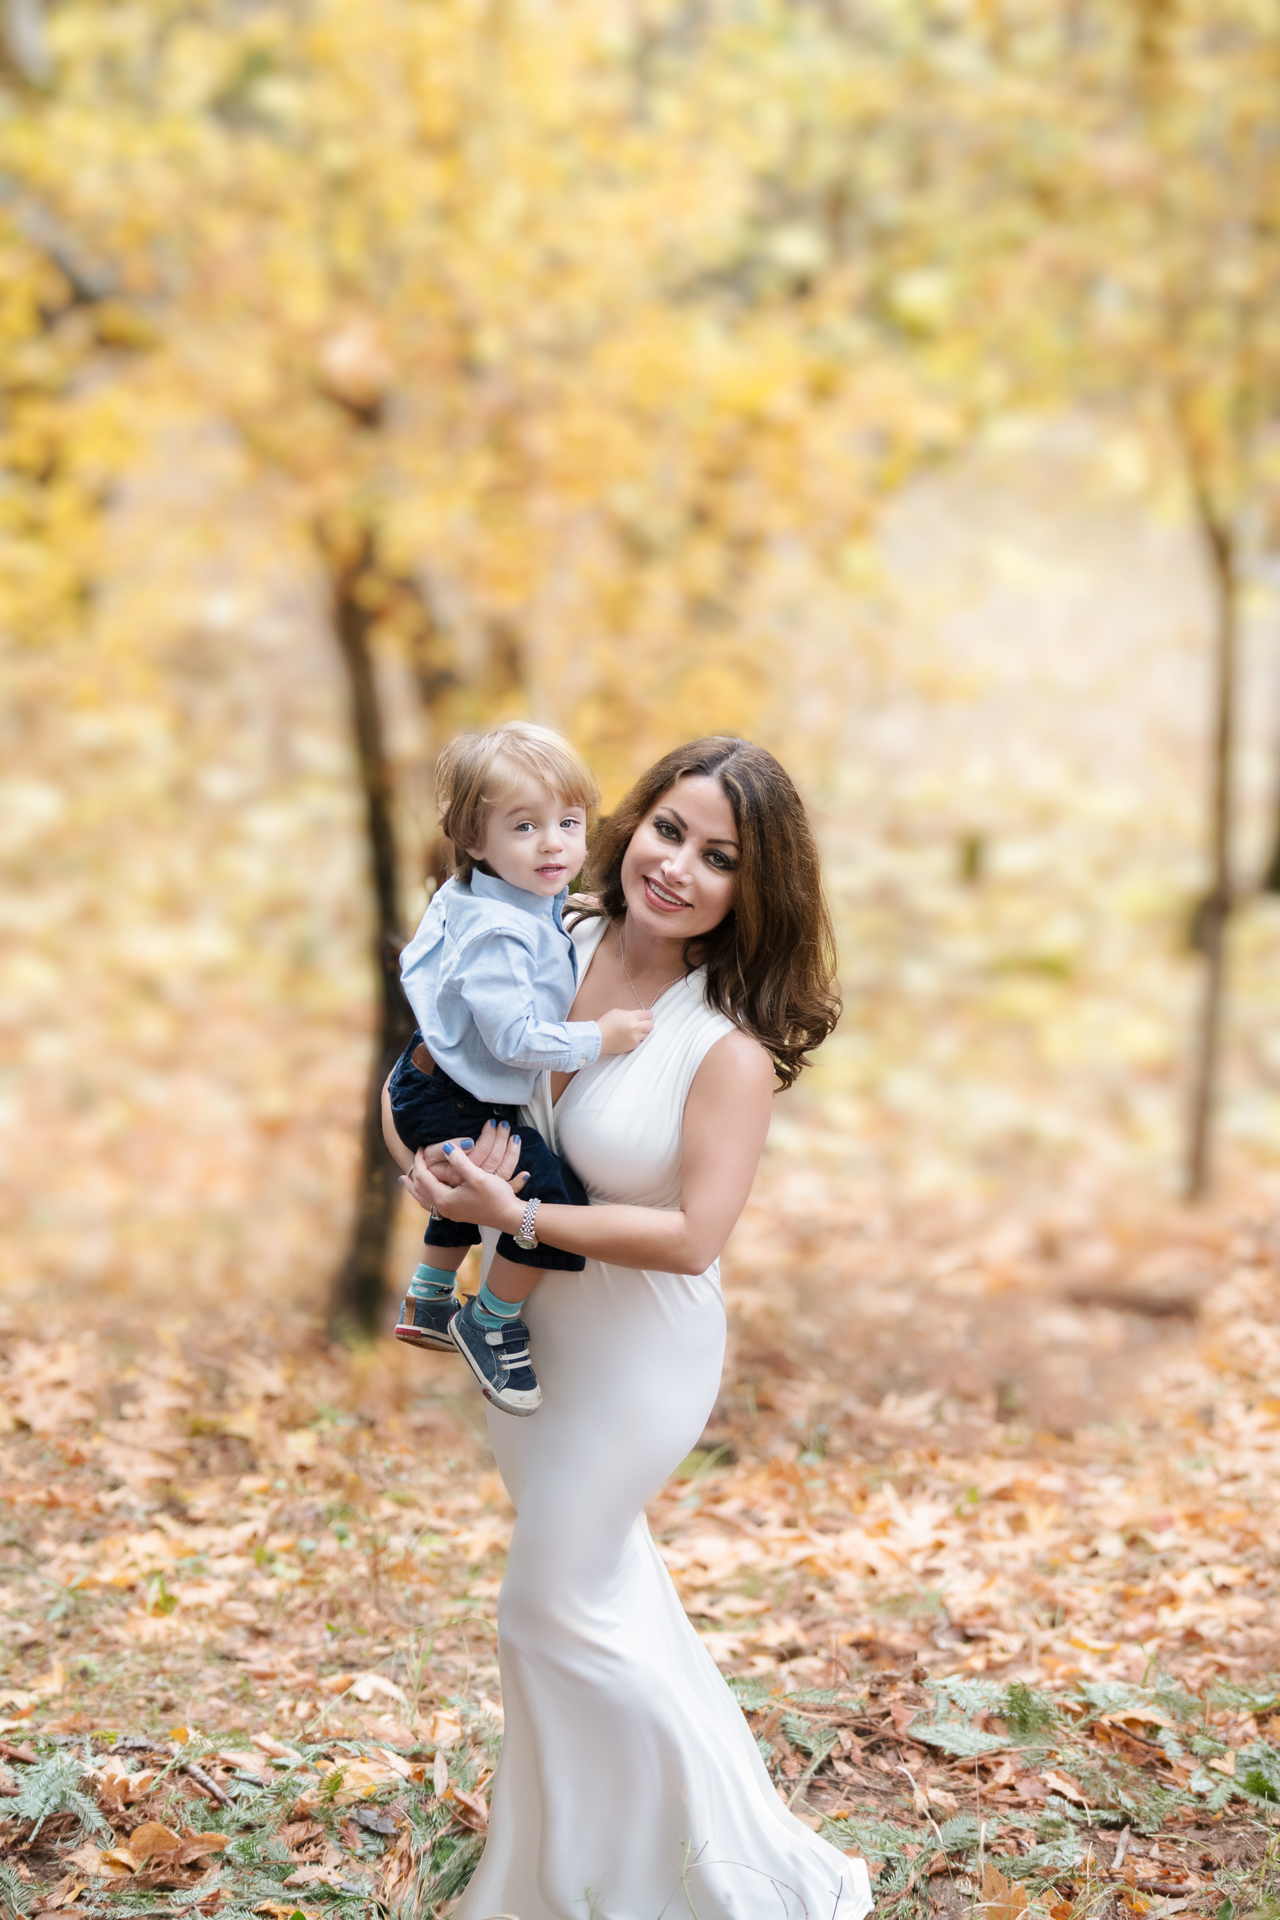 Mom wearing a white dress holding her 2 year old son posing outdoors during fall season.